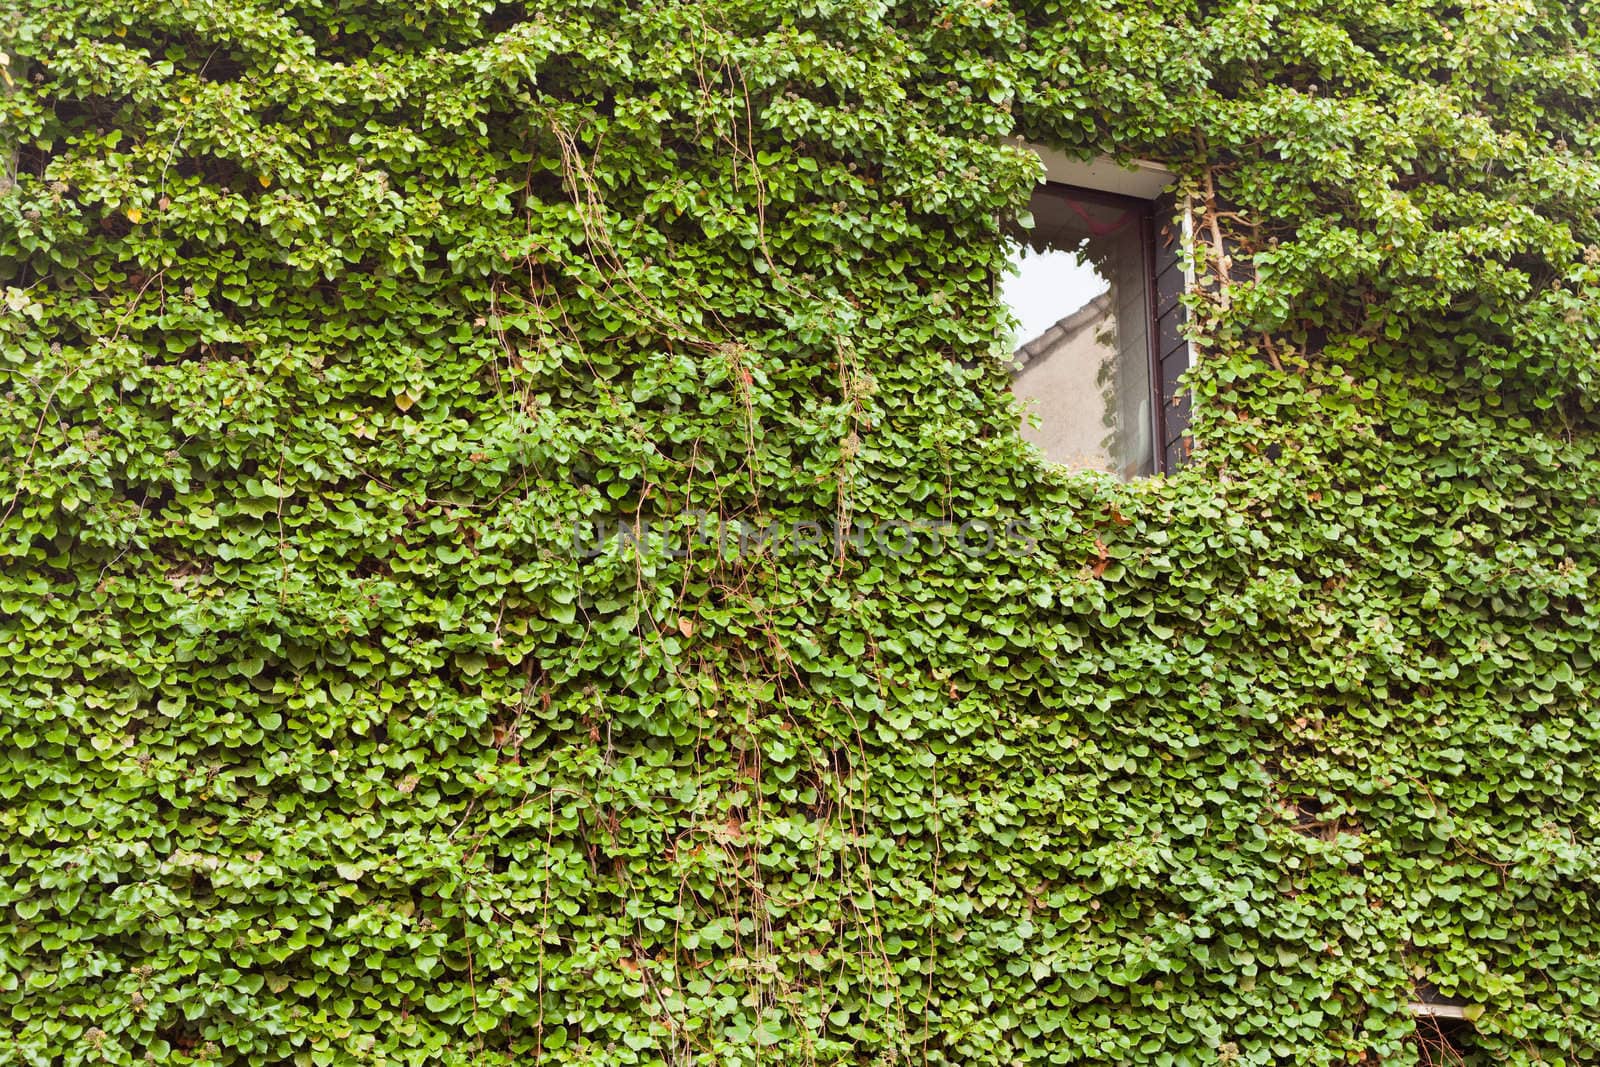 Wall of a house completely overgrown with Common Ivy (Hedera helix).